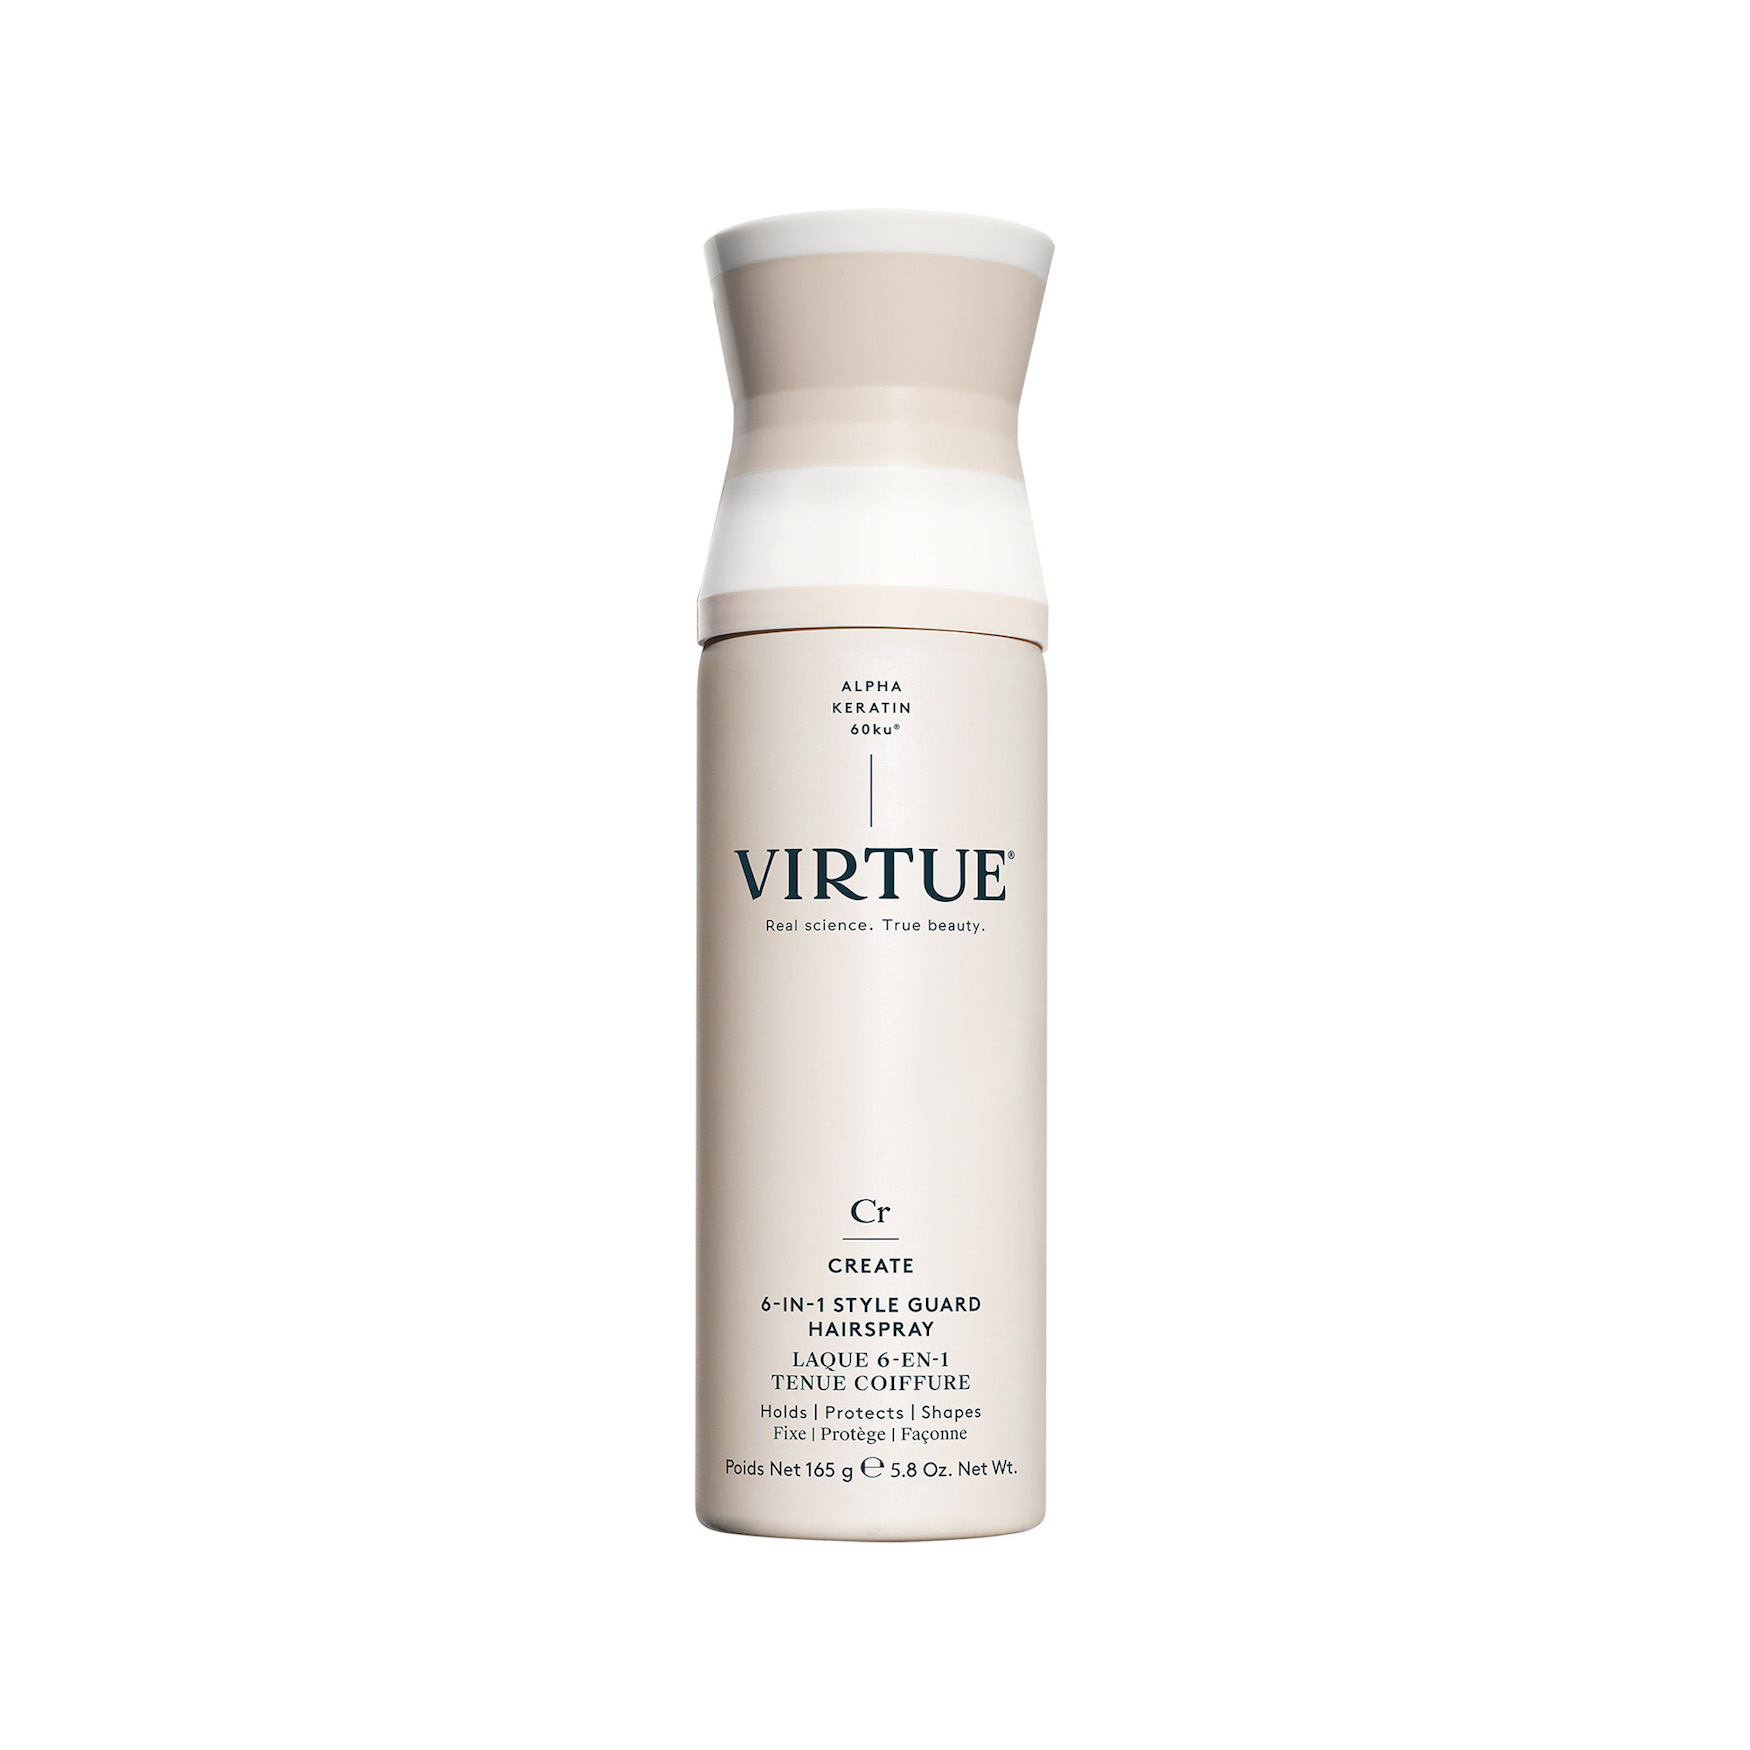 Virtue 6-in-1 Style Guard Hairspray | Space NK